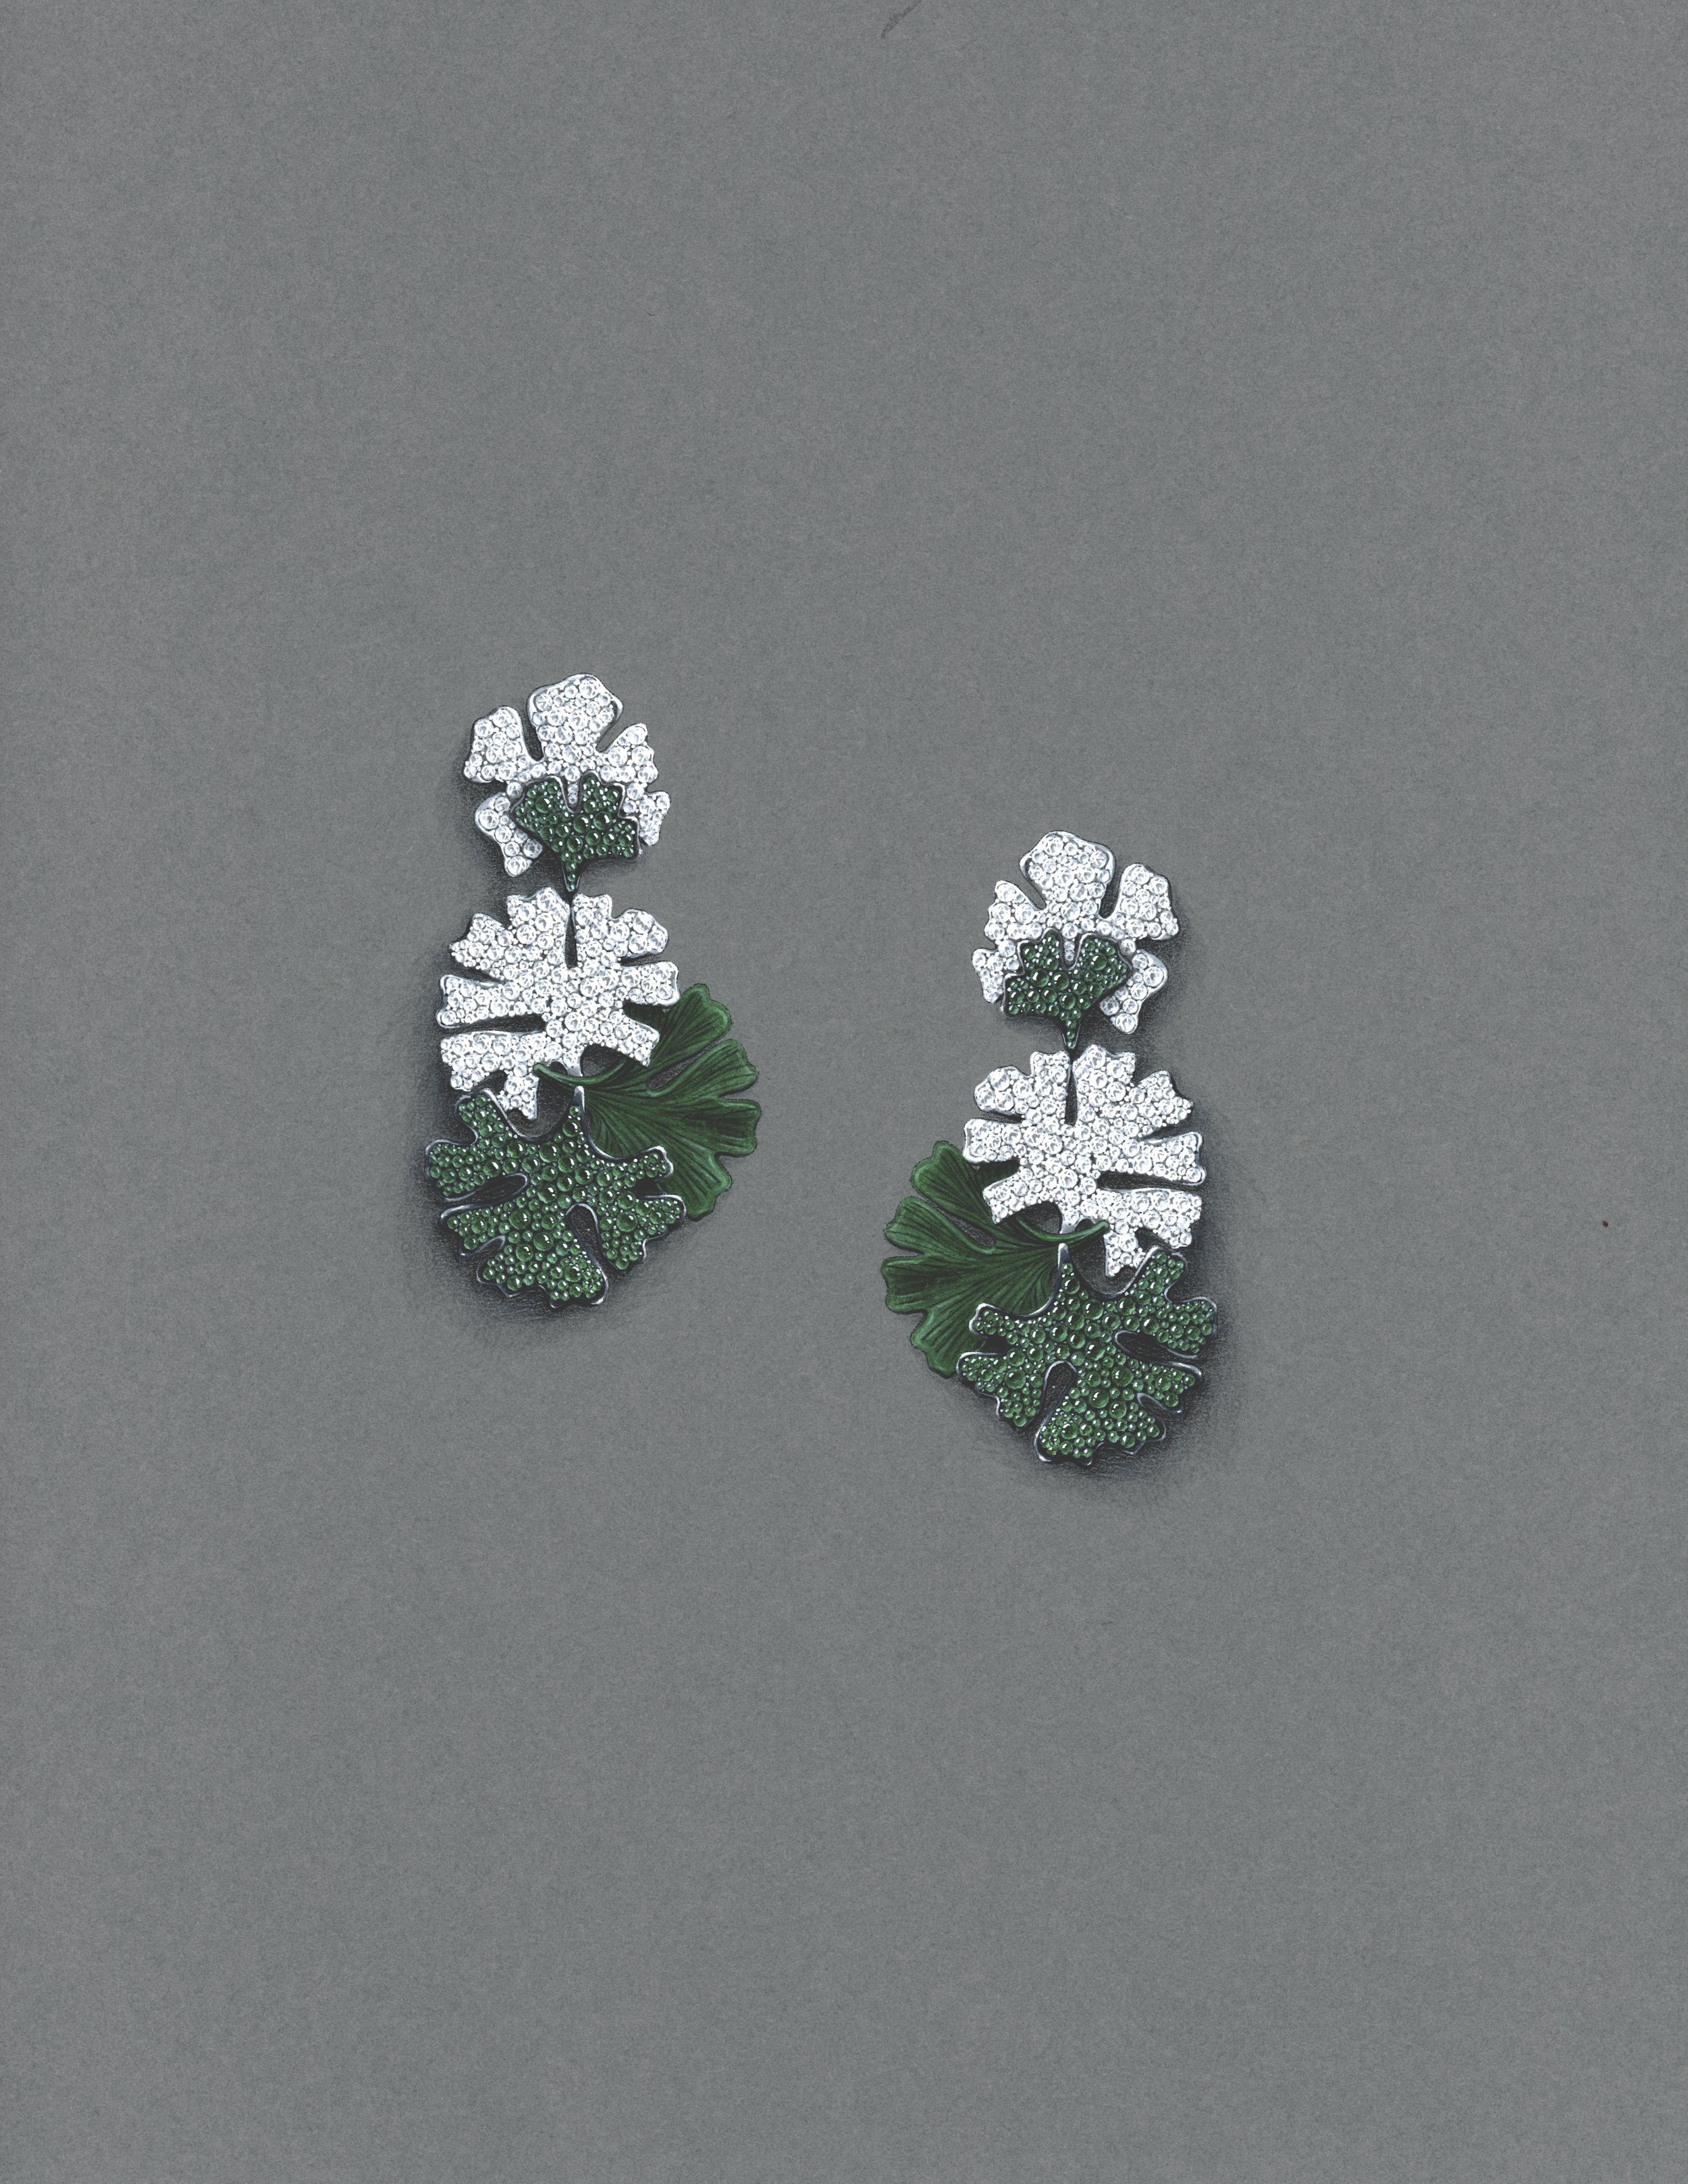  Gouache painting of a pair of earrings with emerald cabochon pave, white diamond pave, set in 18k white gold, with anodized aluminum.  Digitally manipulated to reflect the completed right side on the left. 